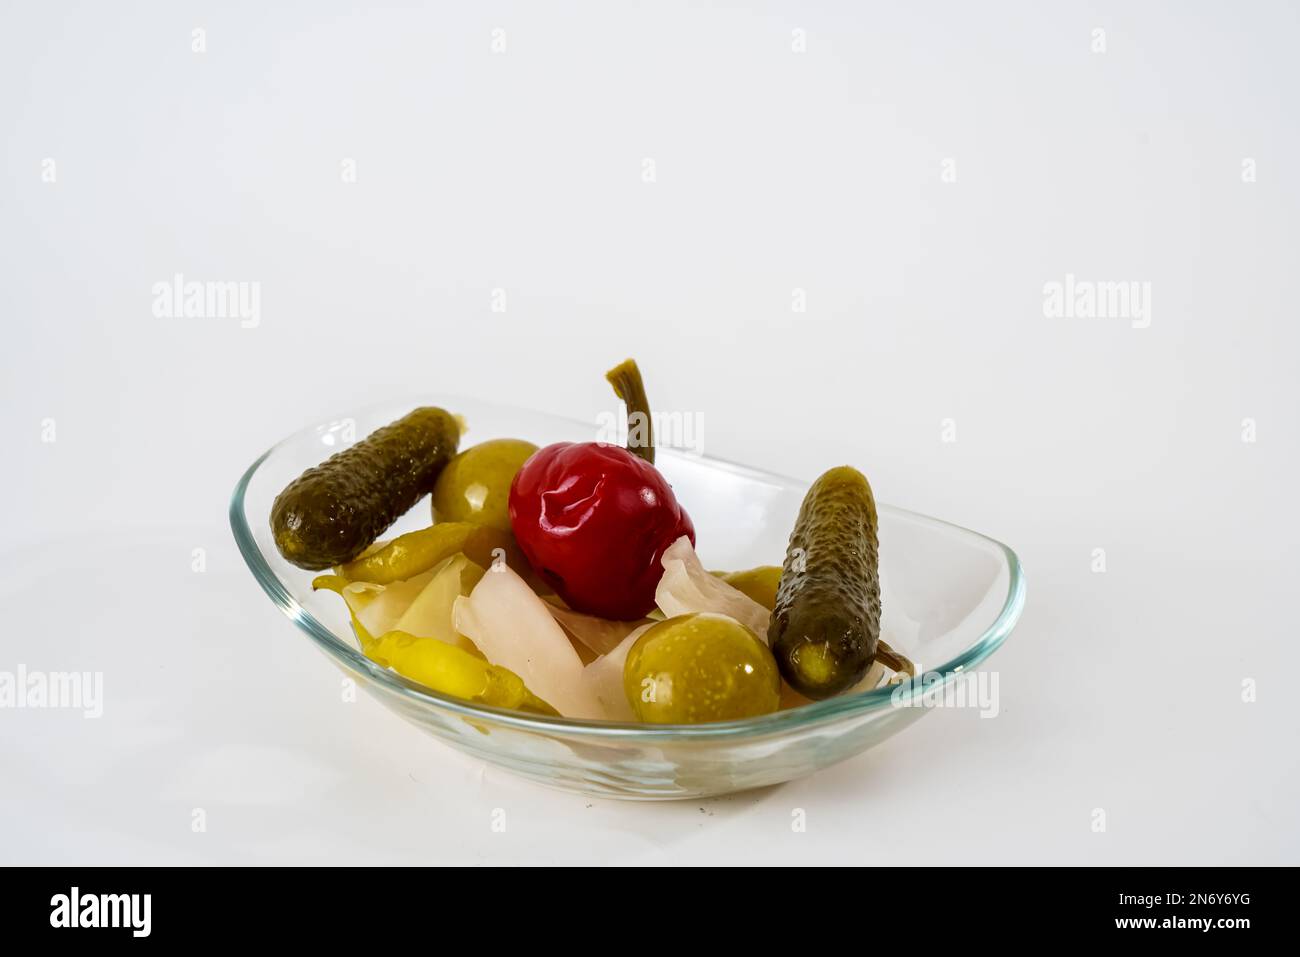 Mixed gherkins, sauerkraut, pepper, tomato and cucumber pickles on glass plate isolated on white background. Stock Photo